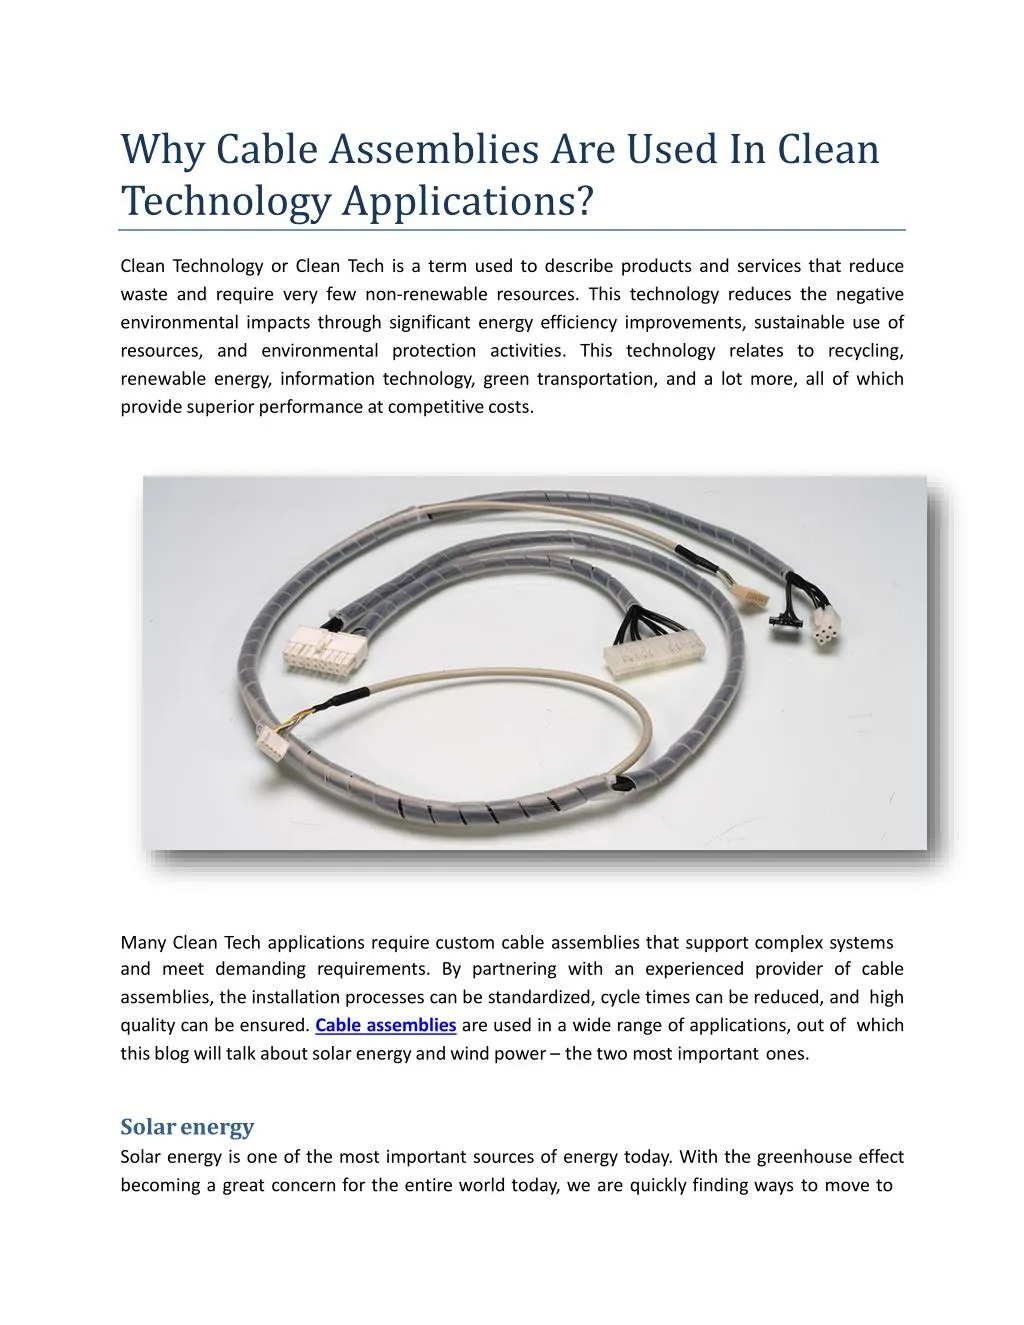 why cable assemblies are used in clean technology